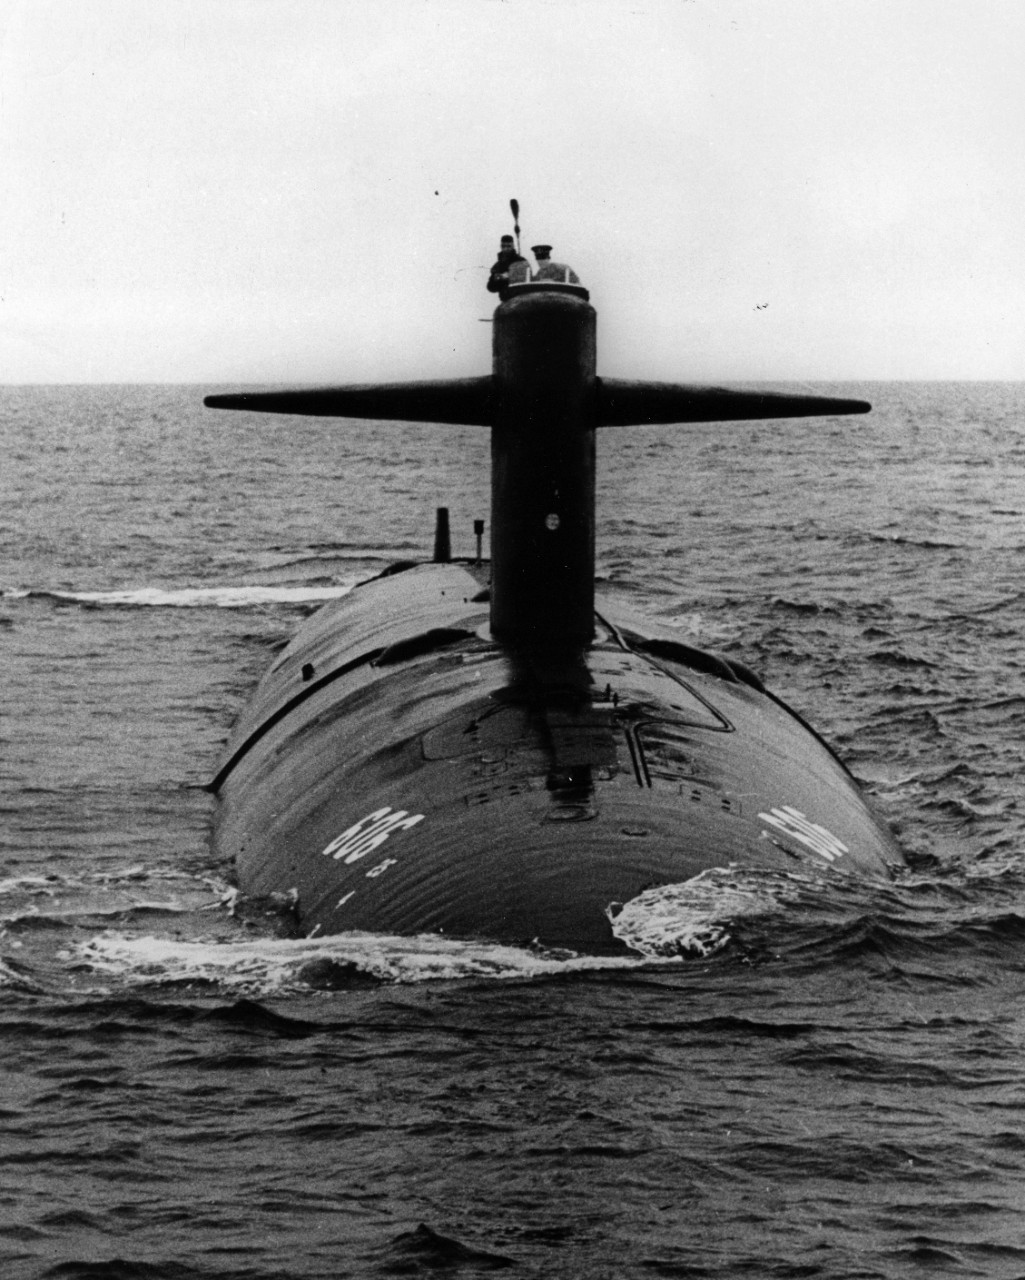 Bow view of nuclear powered attack submarine USS Tinosa (SSN-606) underway on the surface, September 1964